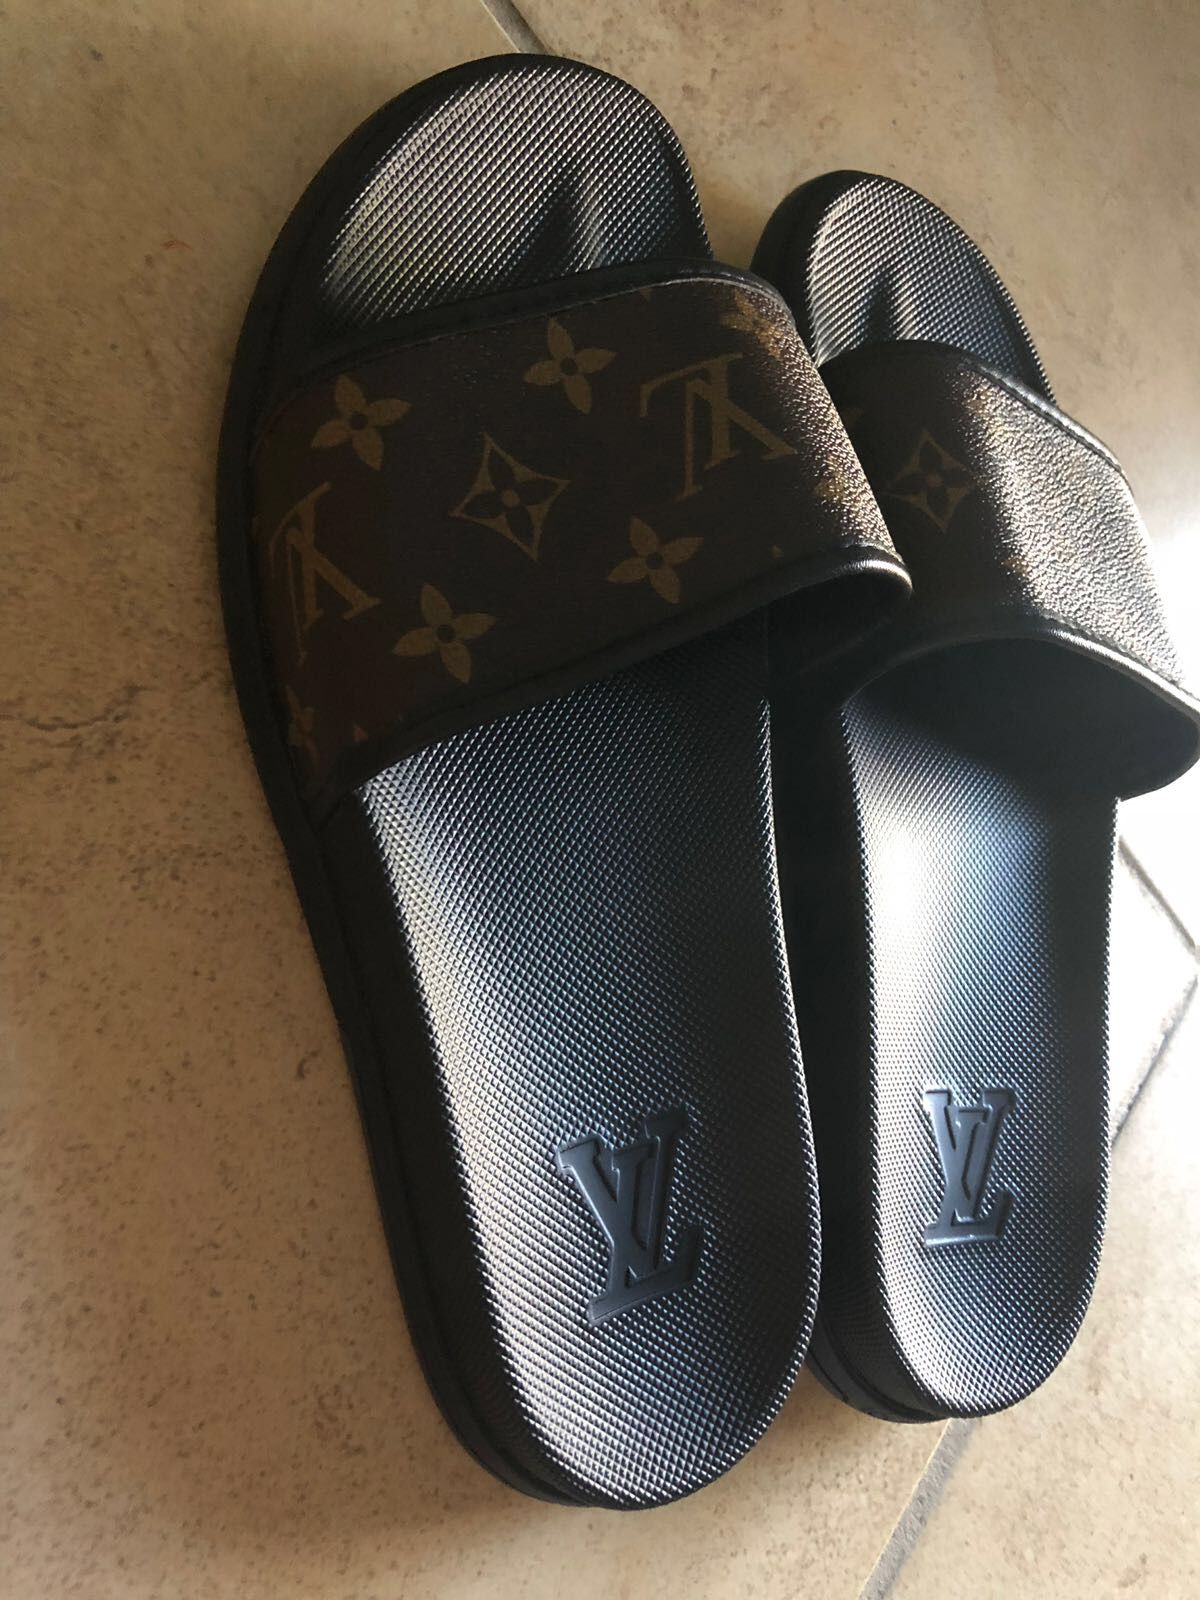 Louis Vuitton Waterfront Mule Slides 10 for Sale in Deer Park, NY - OfferUp